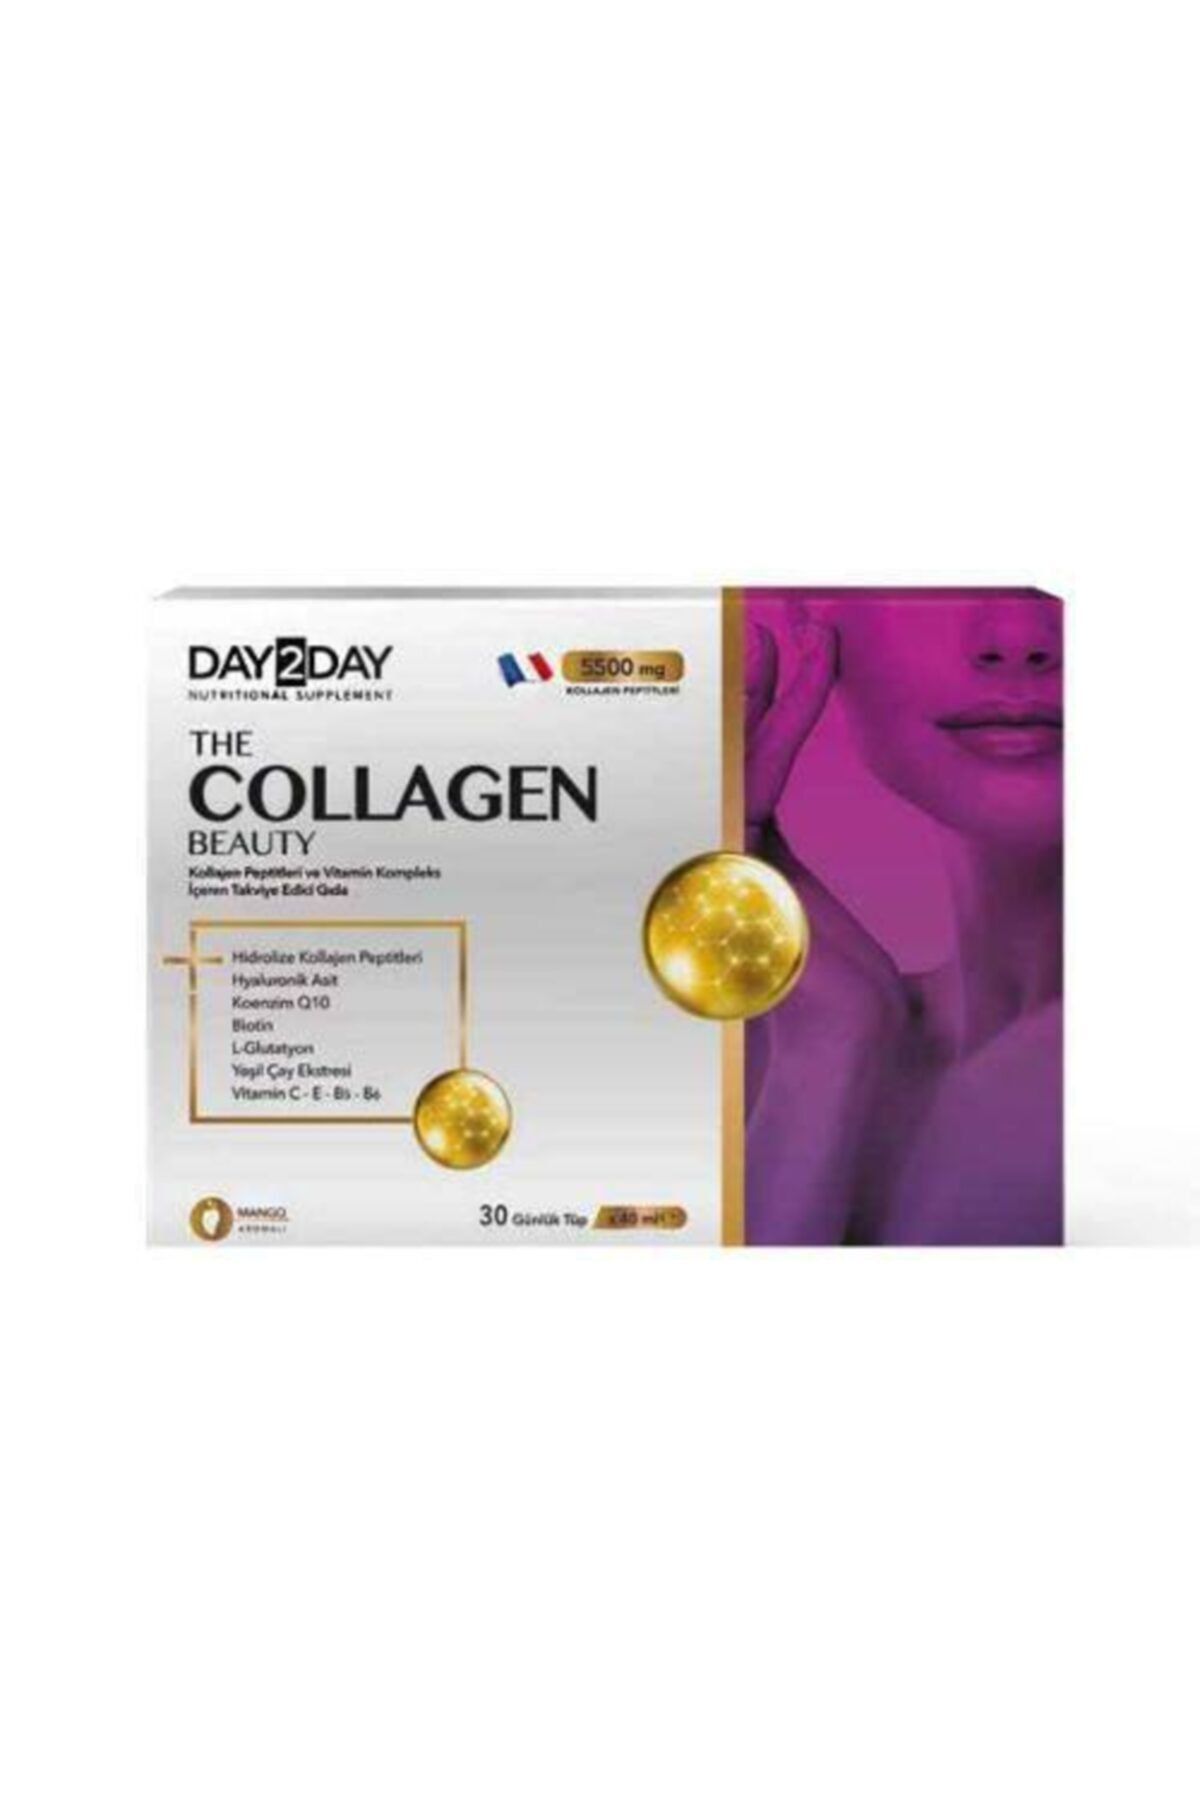 DAY2DAY Day 2 Day The Collagen Beauty 30 Tüp X 40 ml